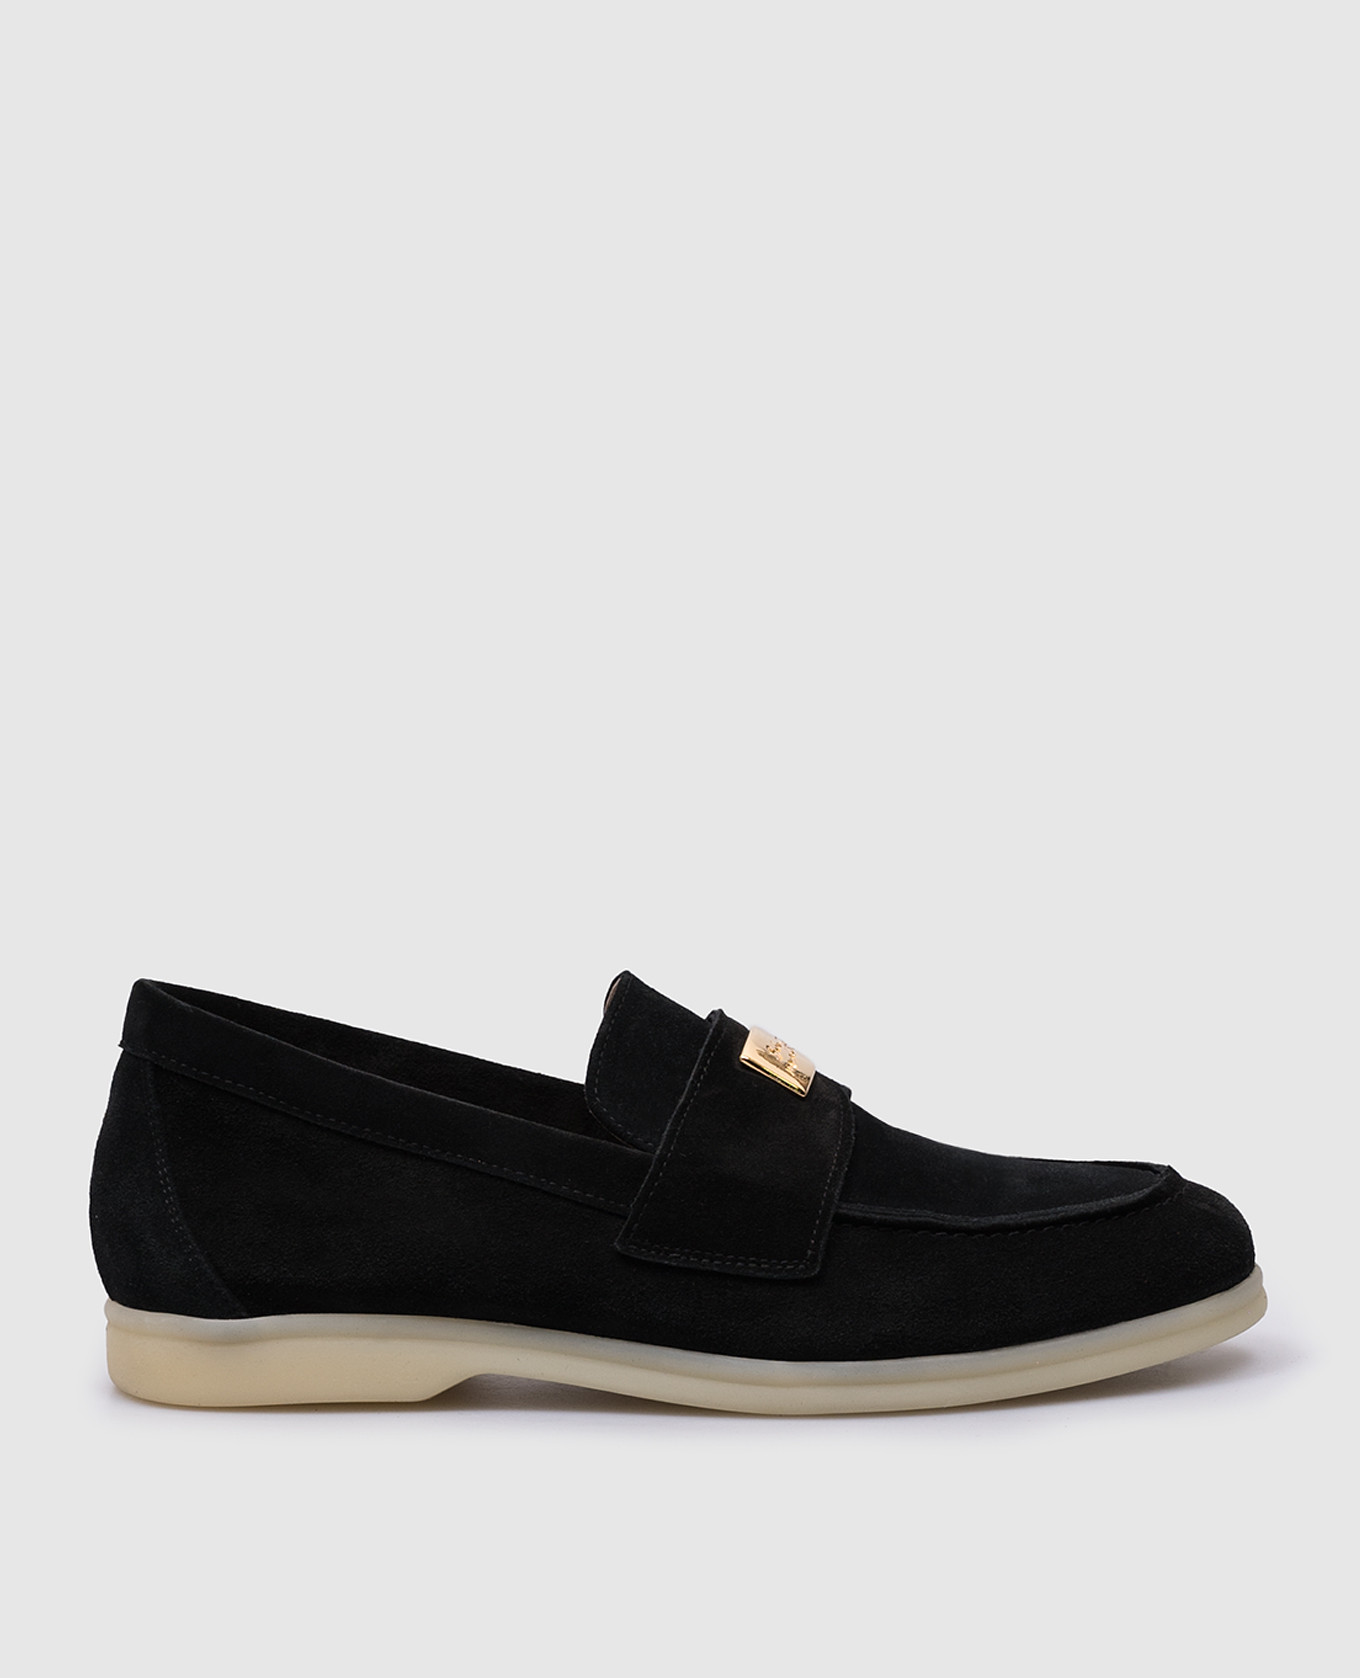 Black suede loafers with metallic logo